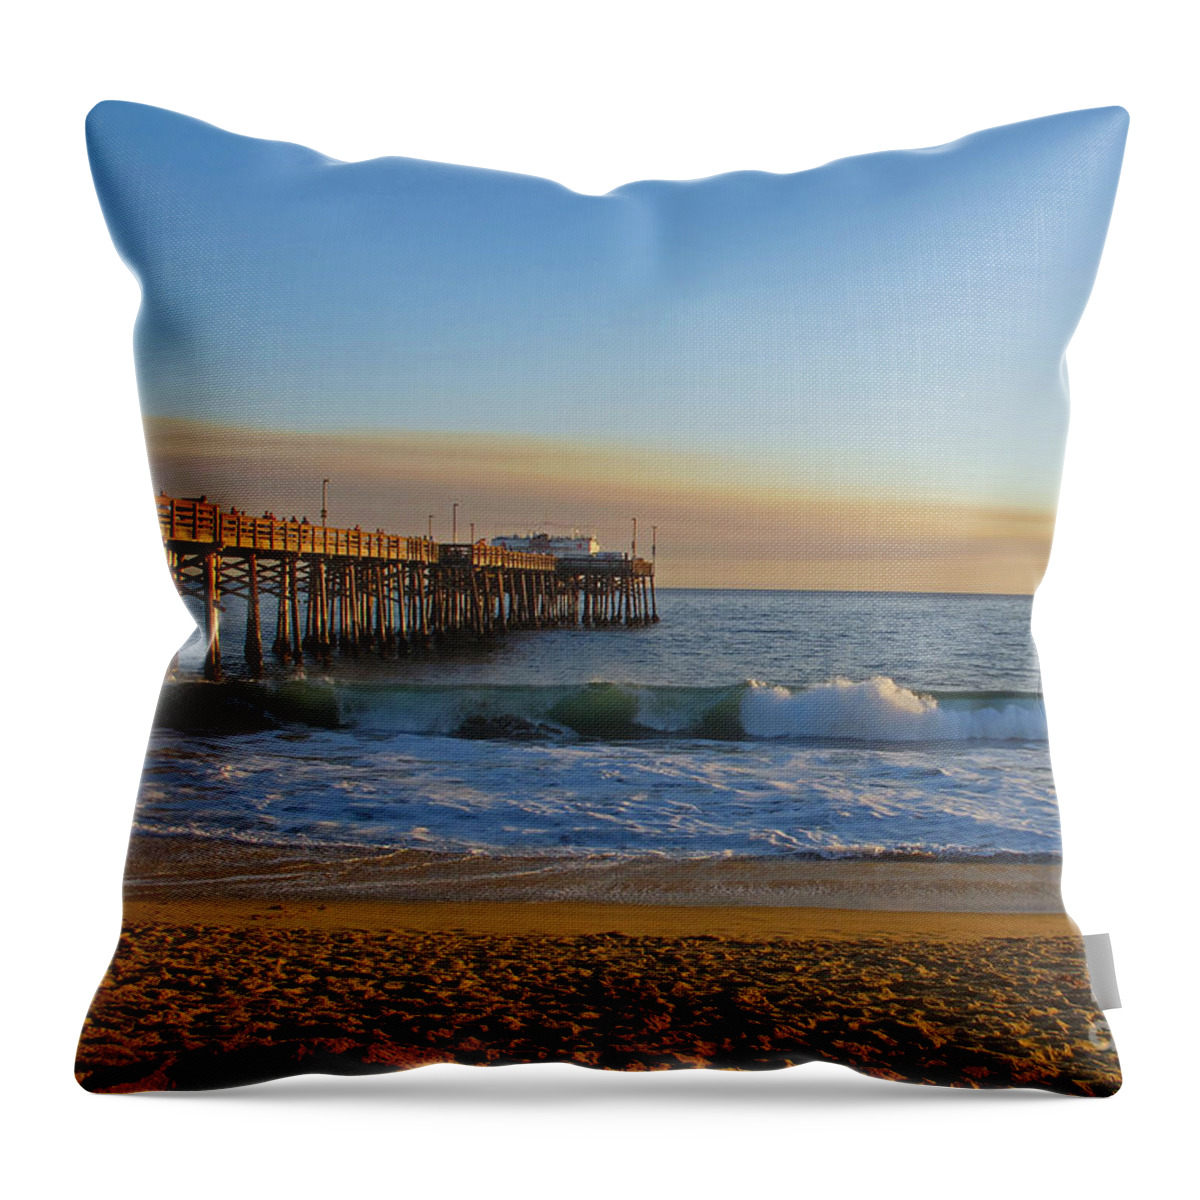 Ocean Throw Pillow featuring the photograph Balboa Pier by Kelly Holm